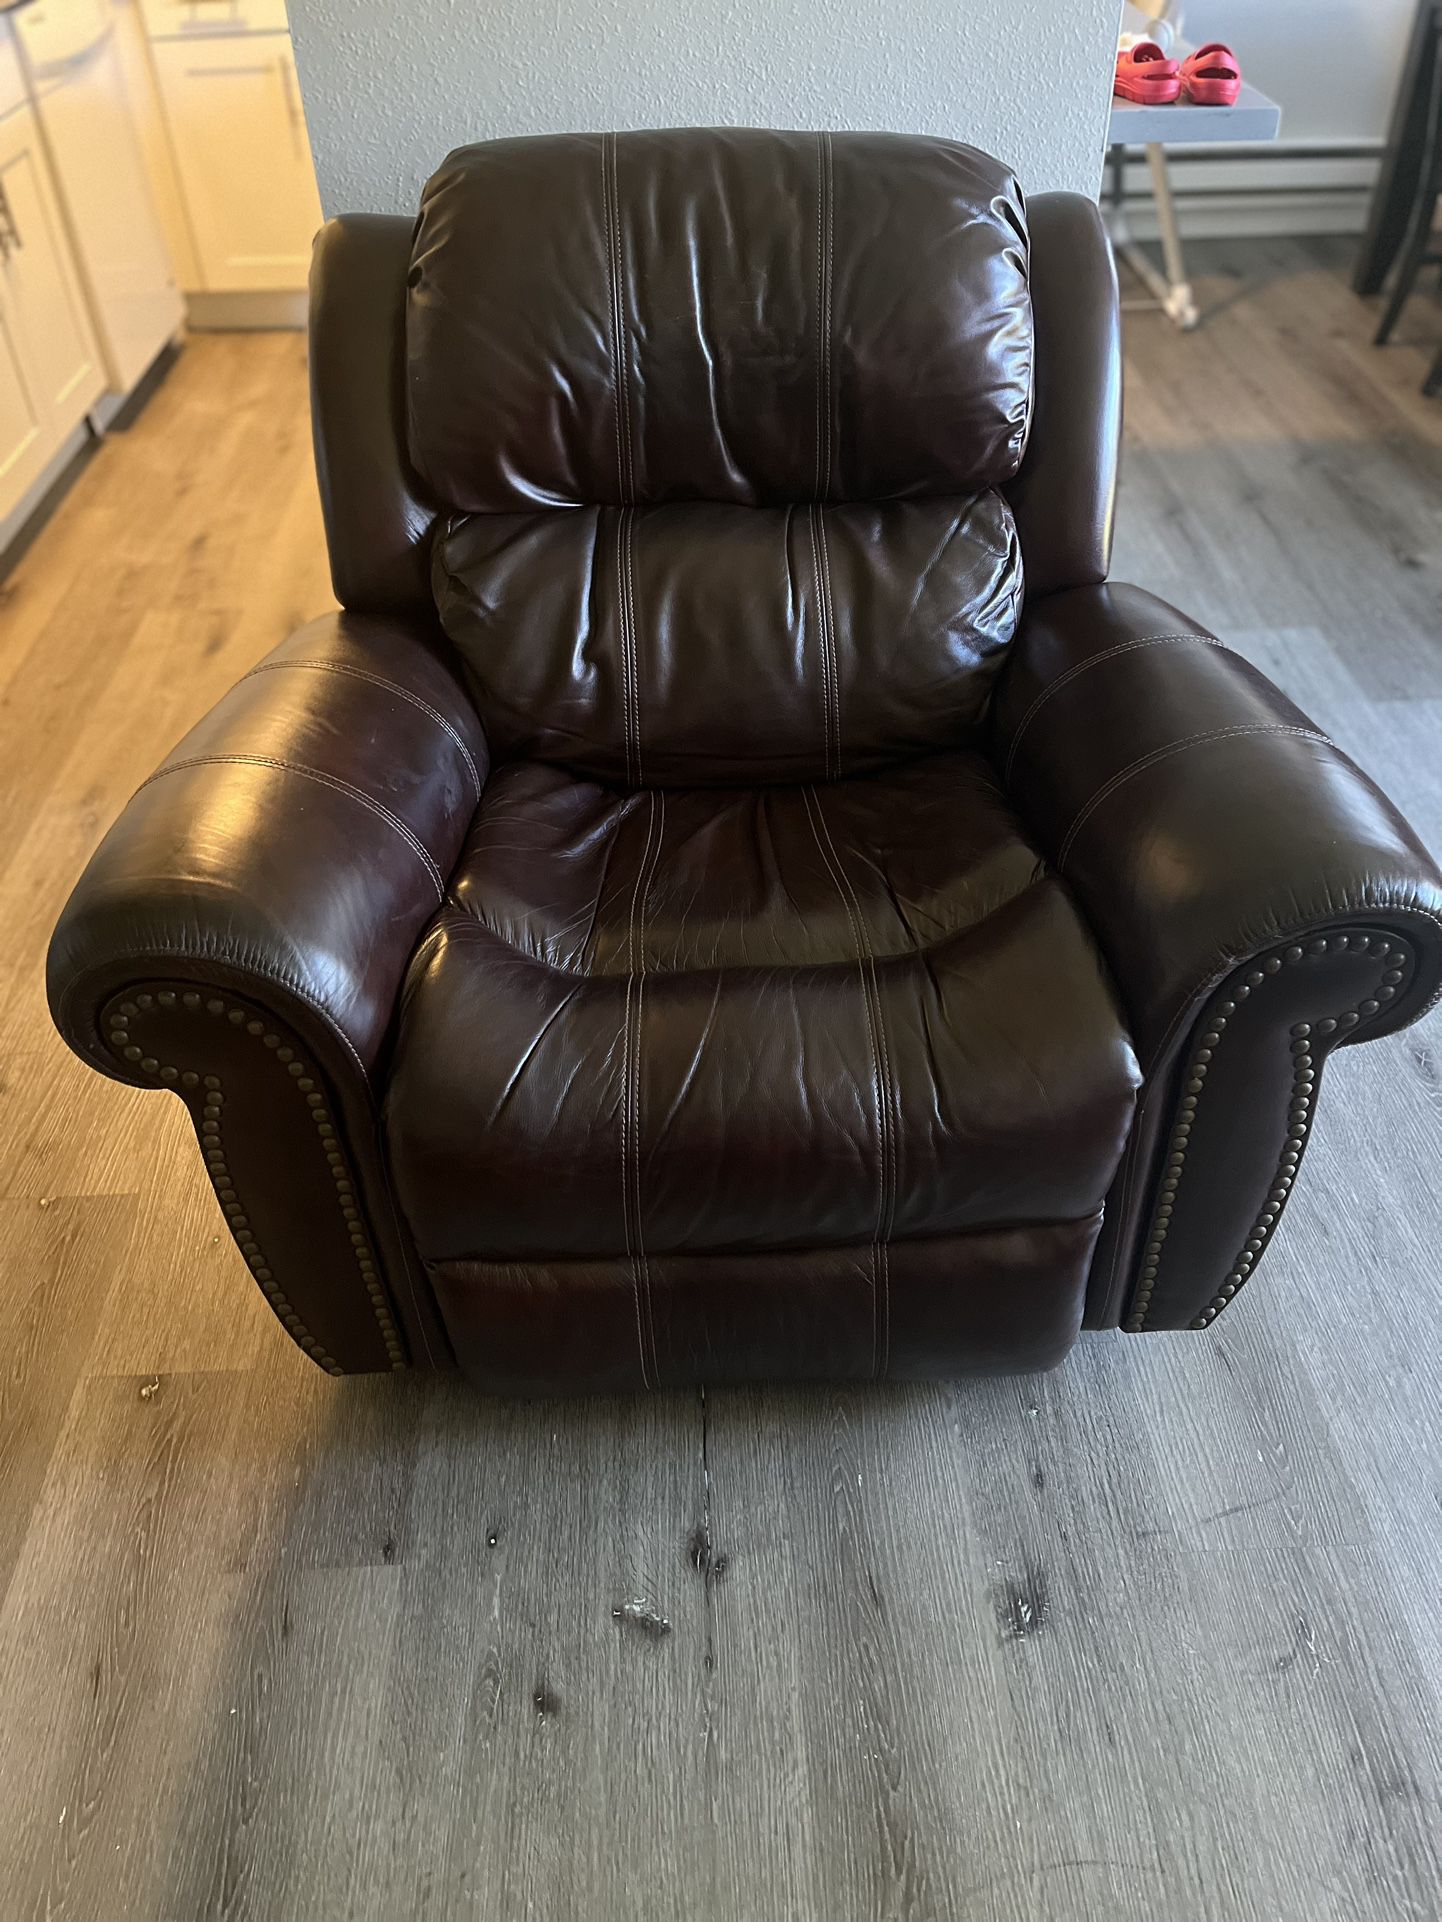 Leather Reclinable Rocking Chair 